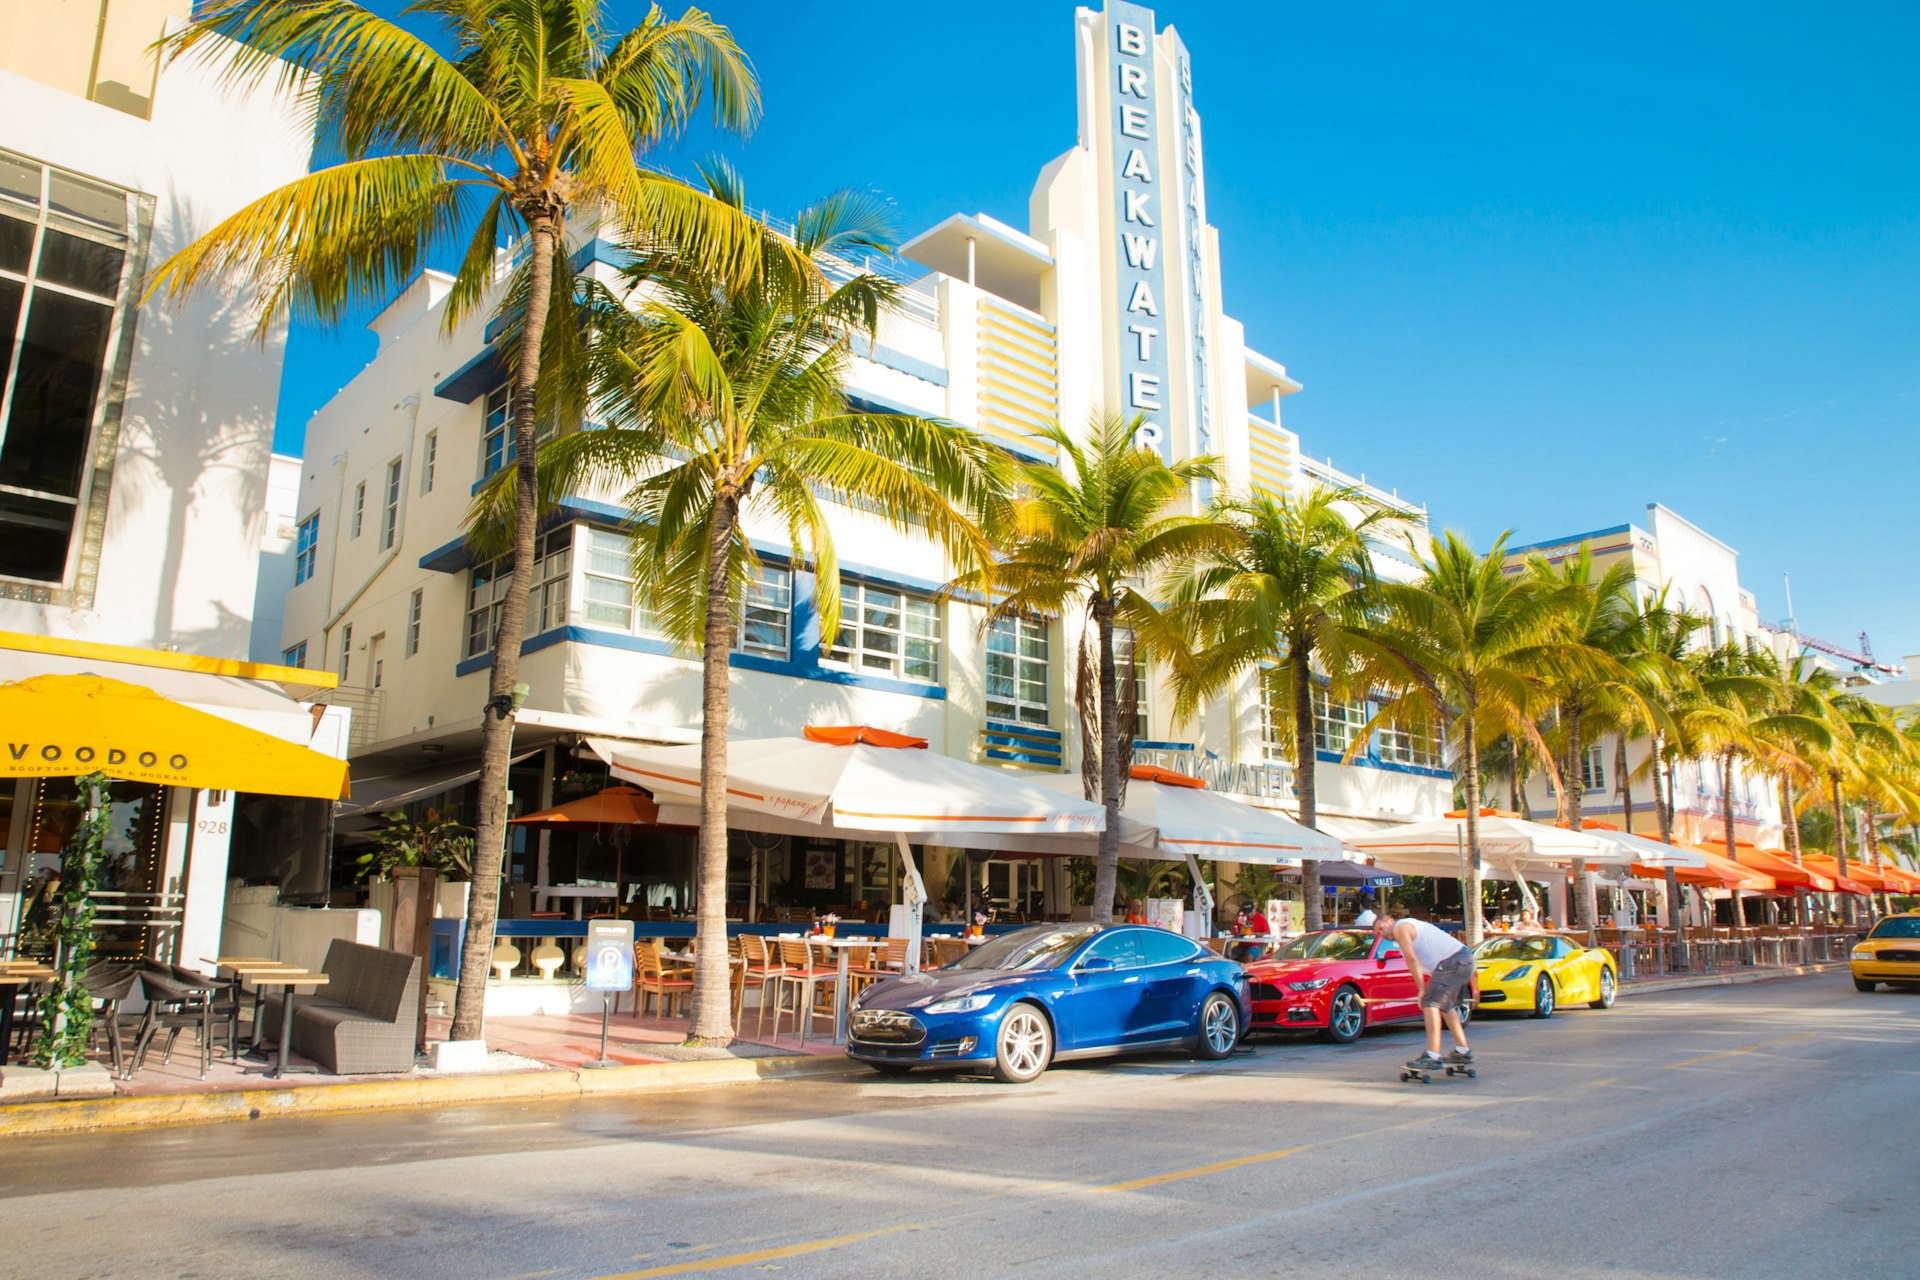 Ocean Drive in the Art Deco district of South Beach, Miami on a sunny day with cars and palm trees